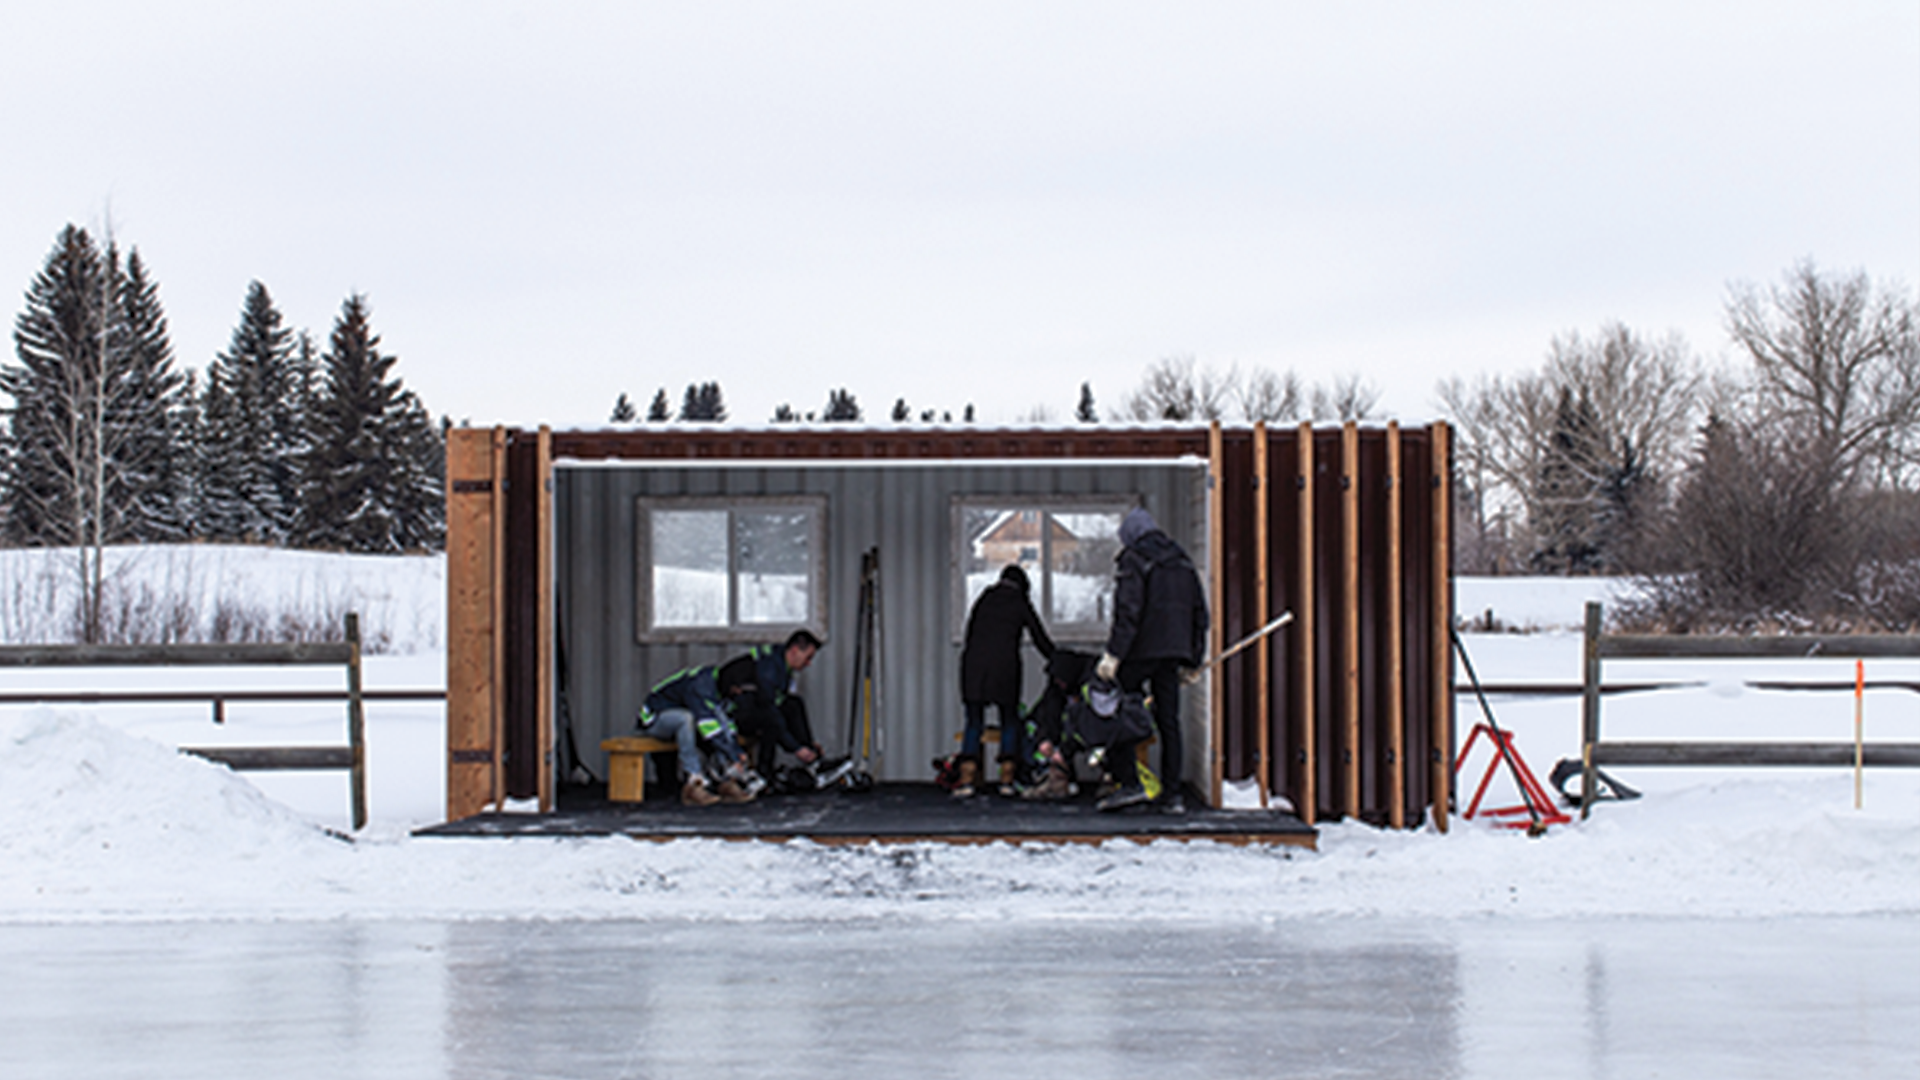 Group of people tying skates inside of container beside a skating rink